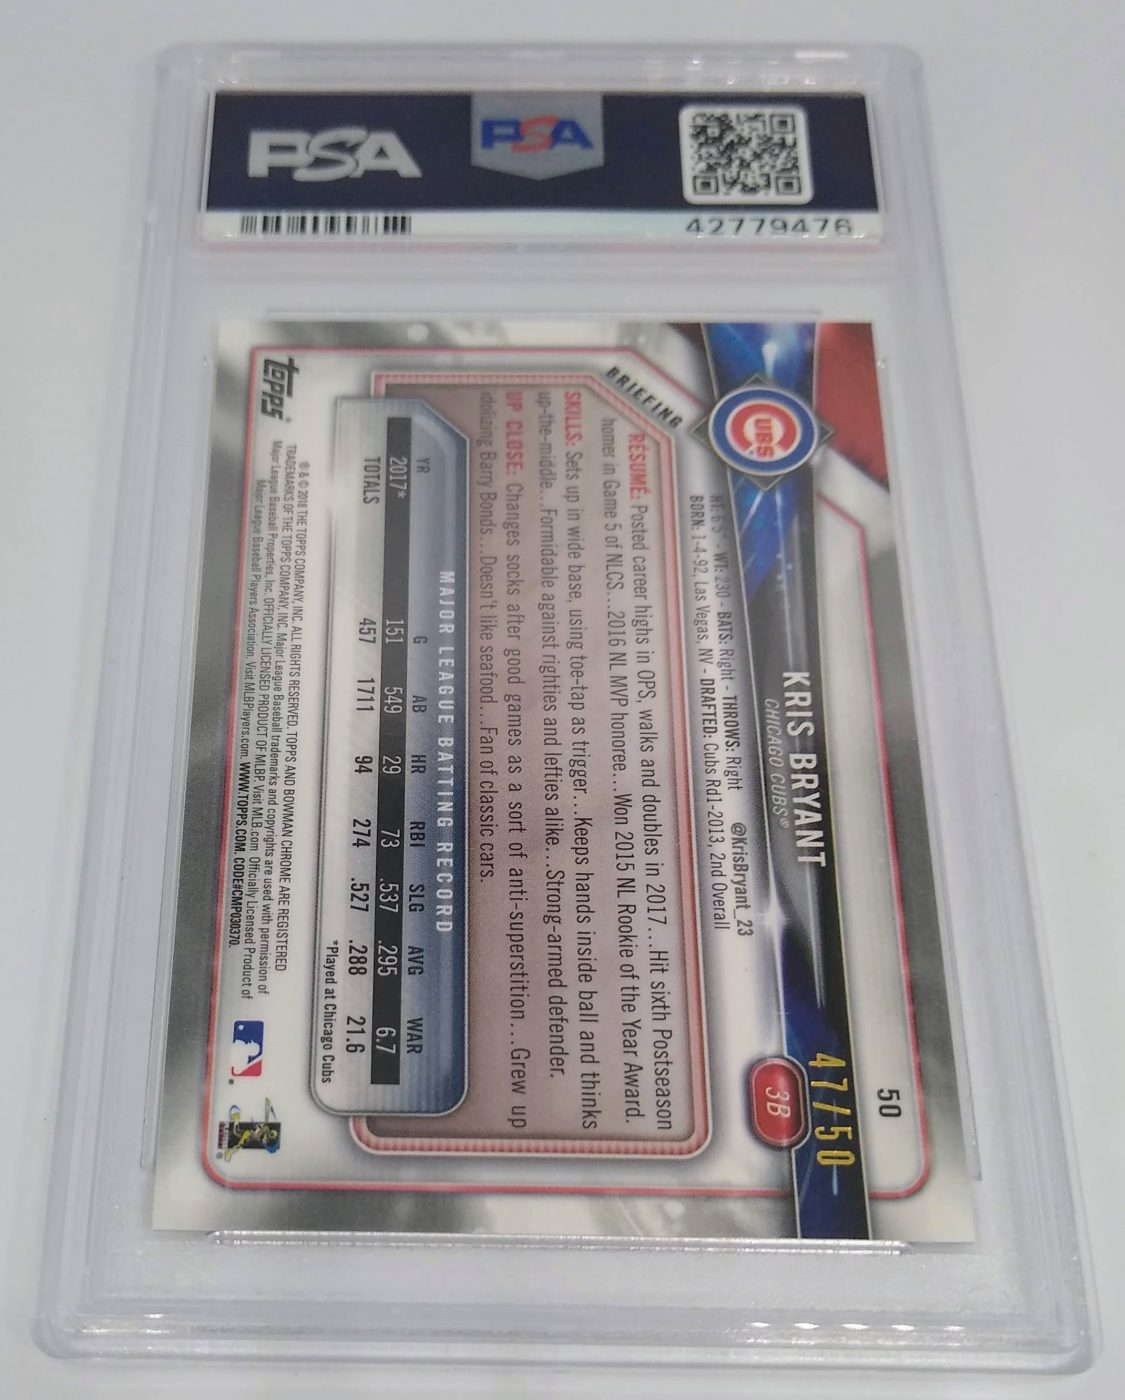 2018 Bowman Chrome Kris Bryant PSA Graded 10 Gold Refractor #'d/50 Baseball Card simple Xclusive Collectibles   